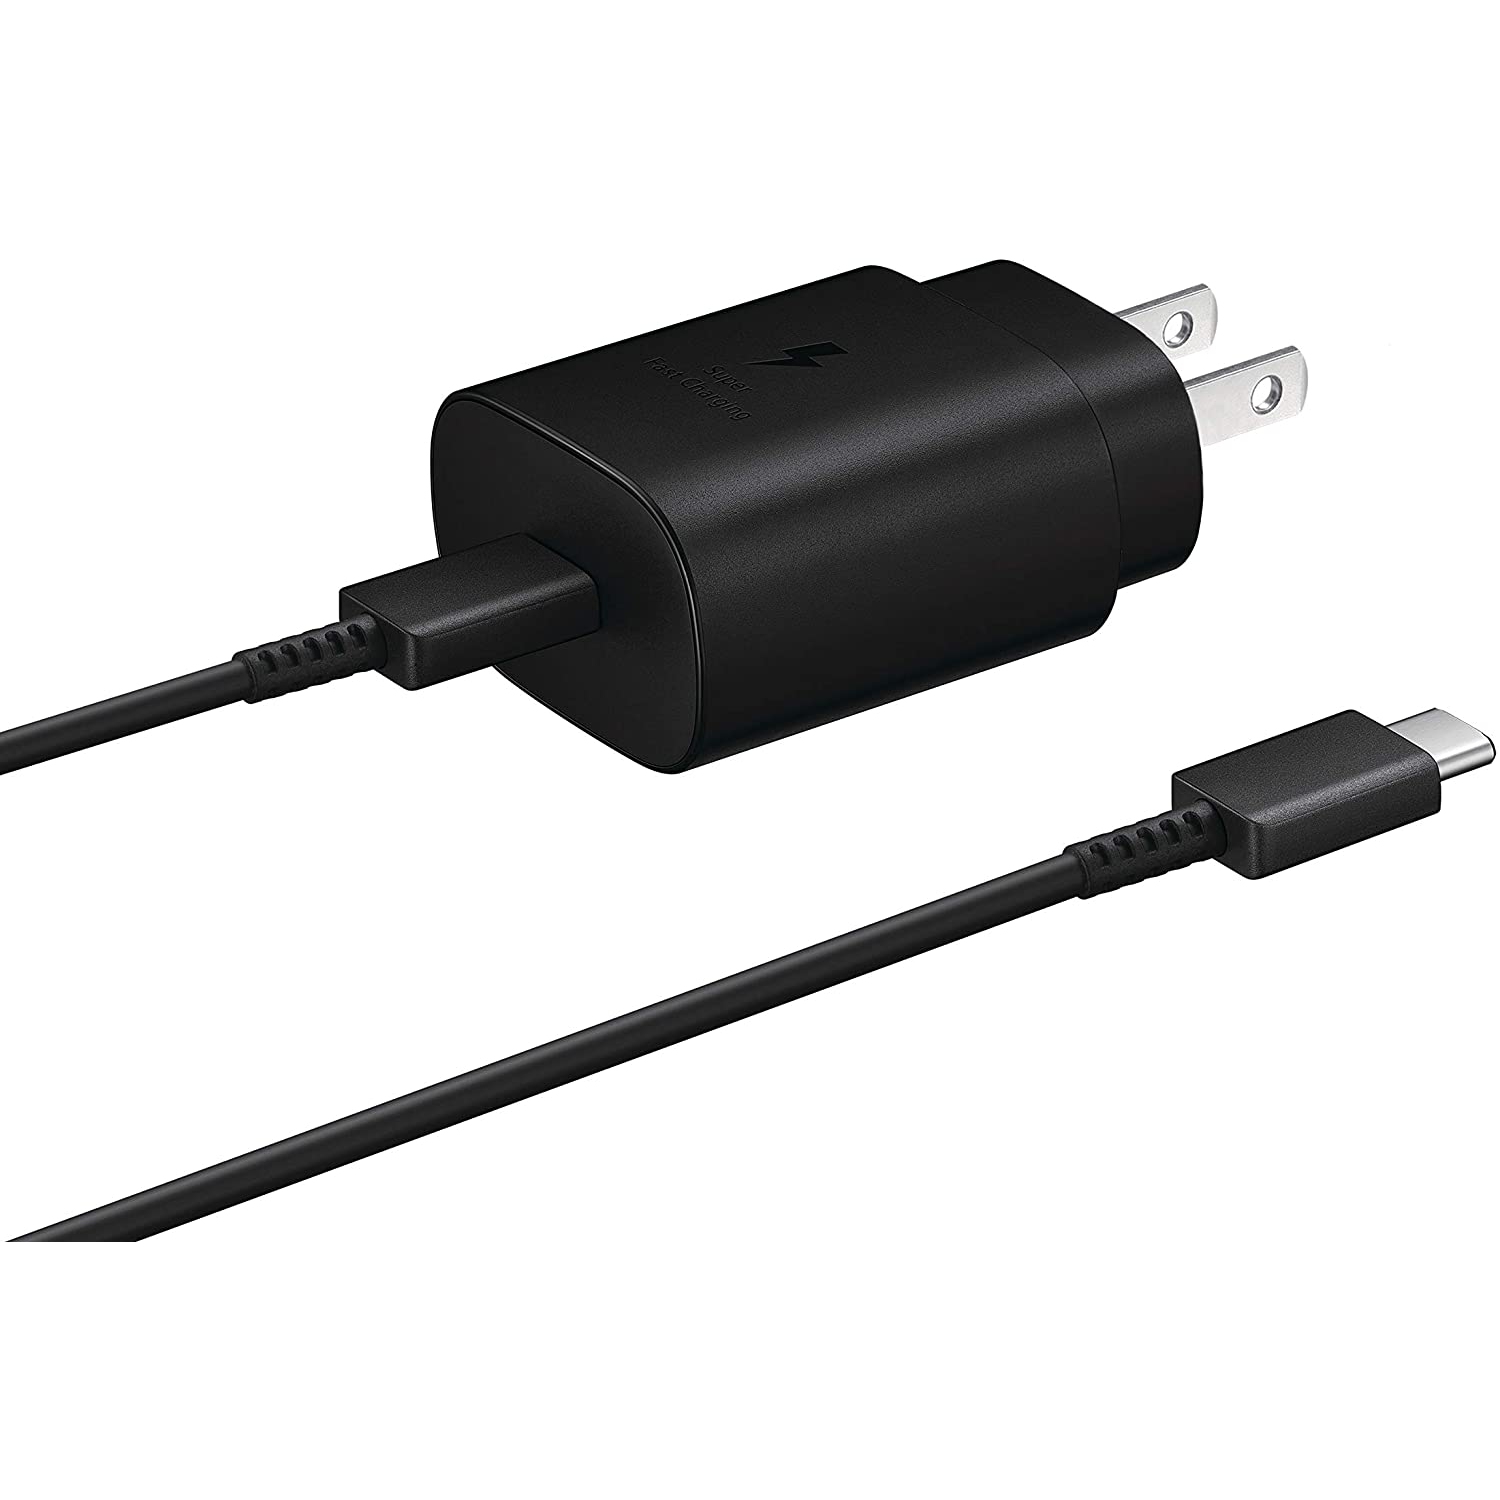 25W USB-C 3.0A Fast Charging Wall Charger Adapter + 1m Type-C Cable for Samsung Galaxy S9 S10 S20 Note 9 10 Plus, Black